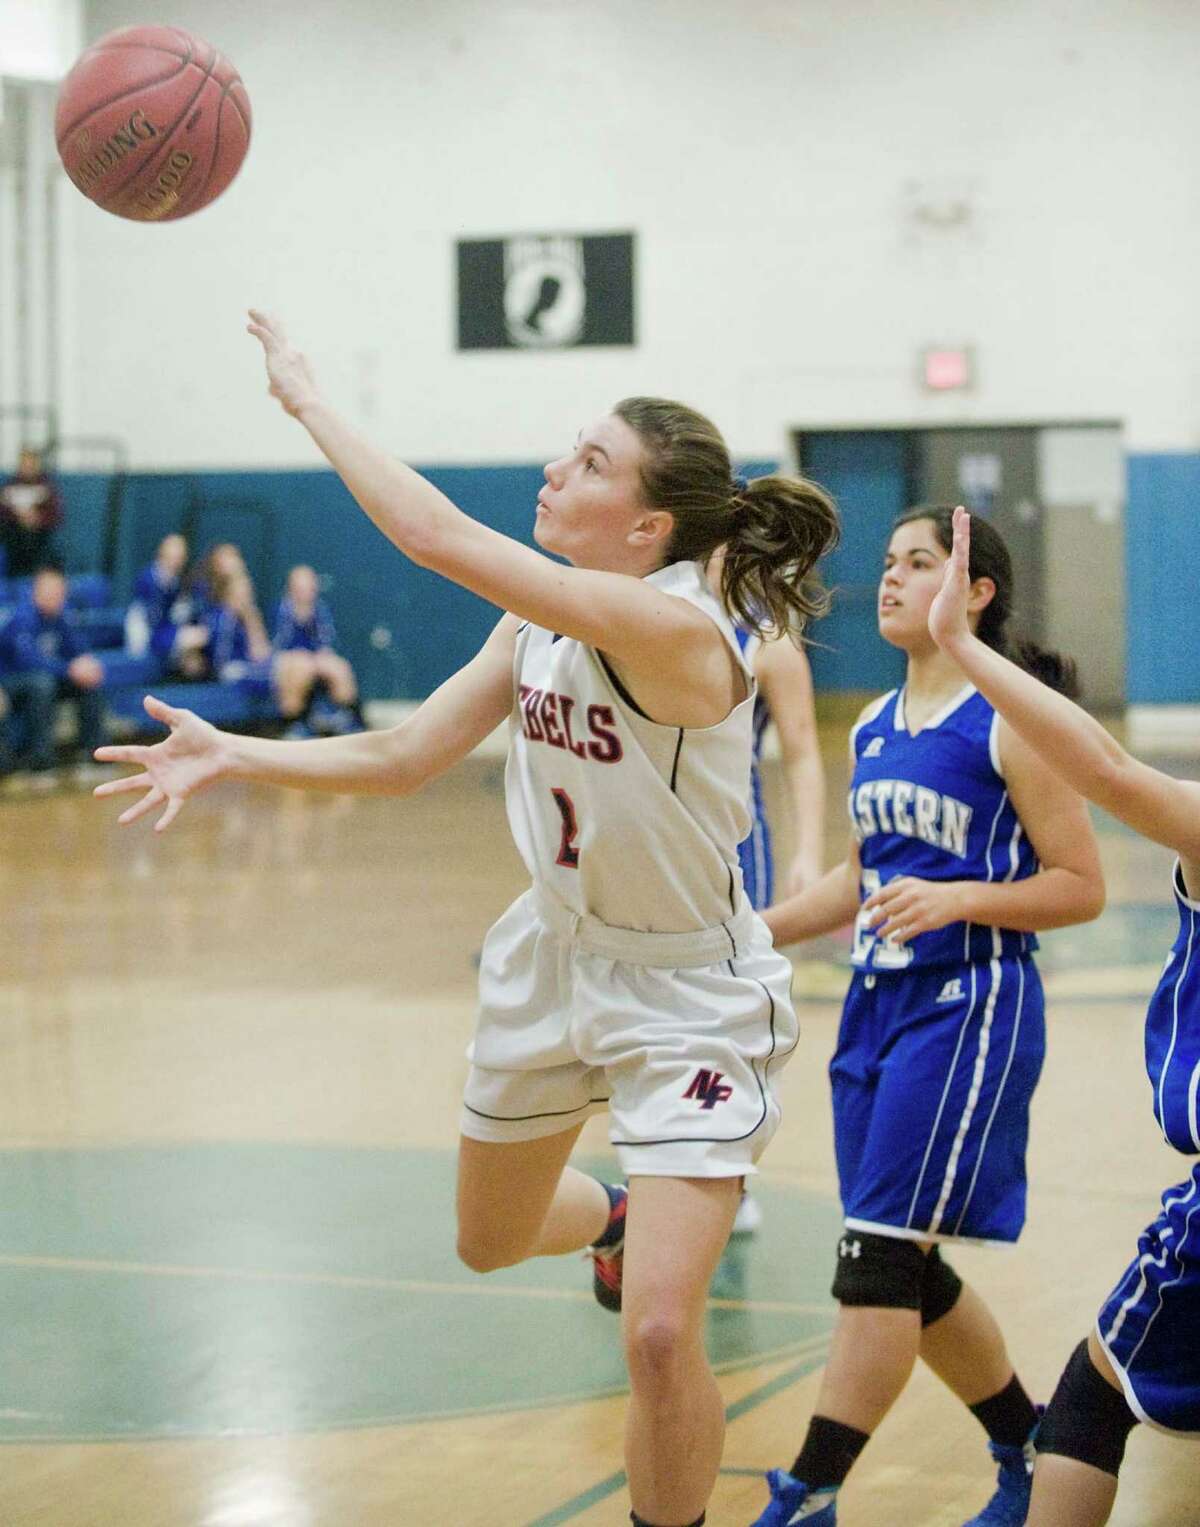 New Fairfield High School vs Bristol Eastern High School in the Greater Danbury News-Times Holiday Festival girls basketball tournament played at the Danbury War Memorial. Monday, Dec. 28, 2015